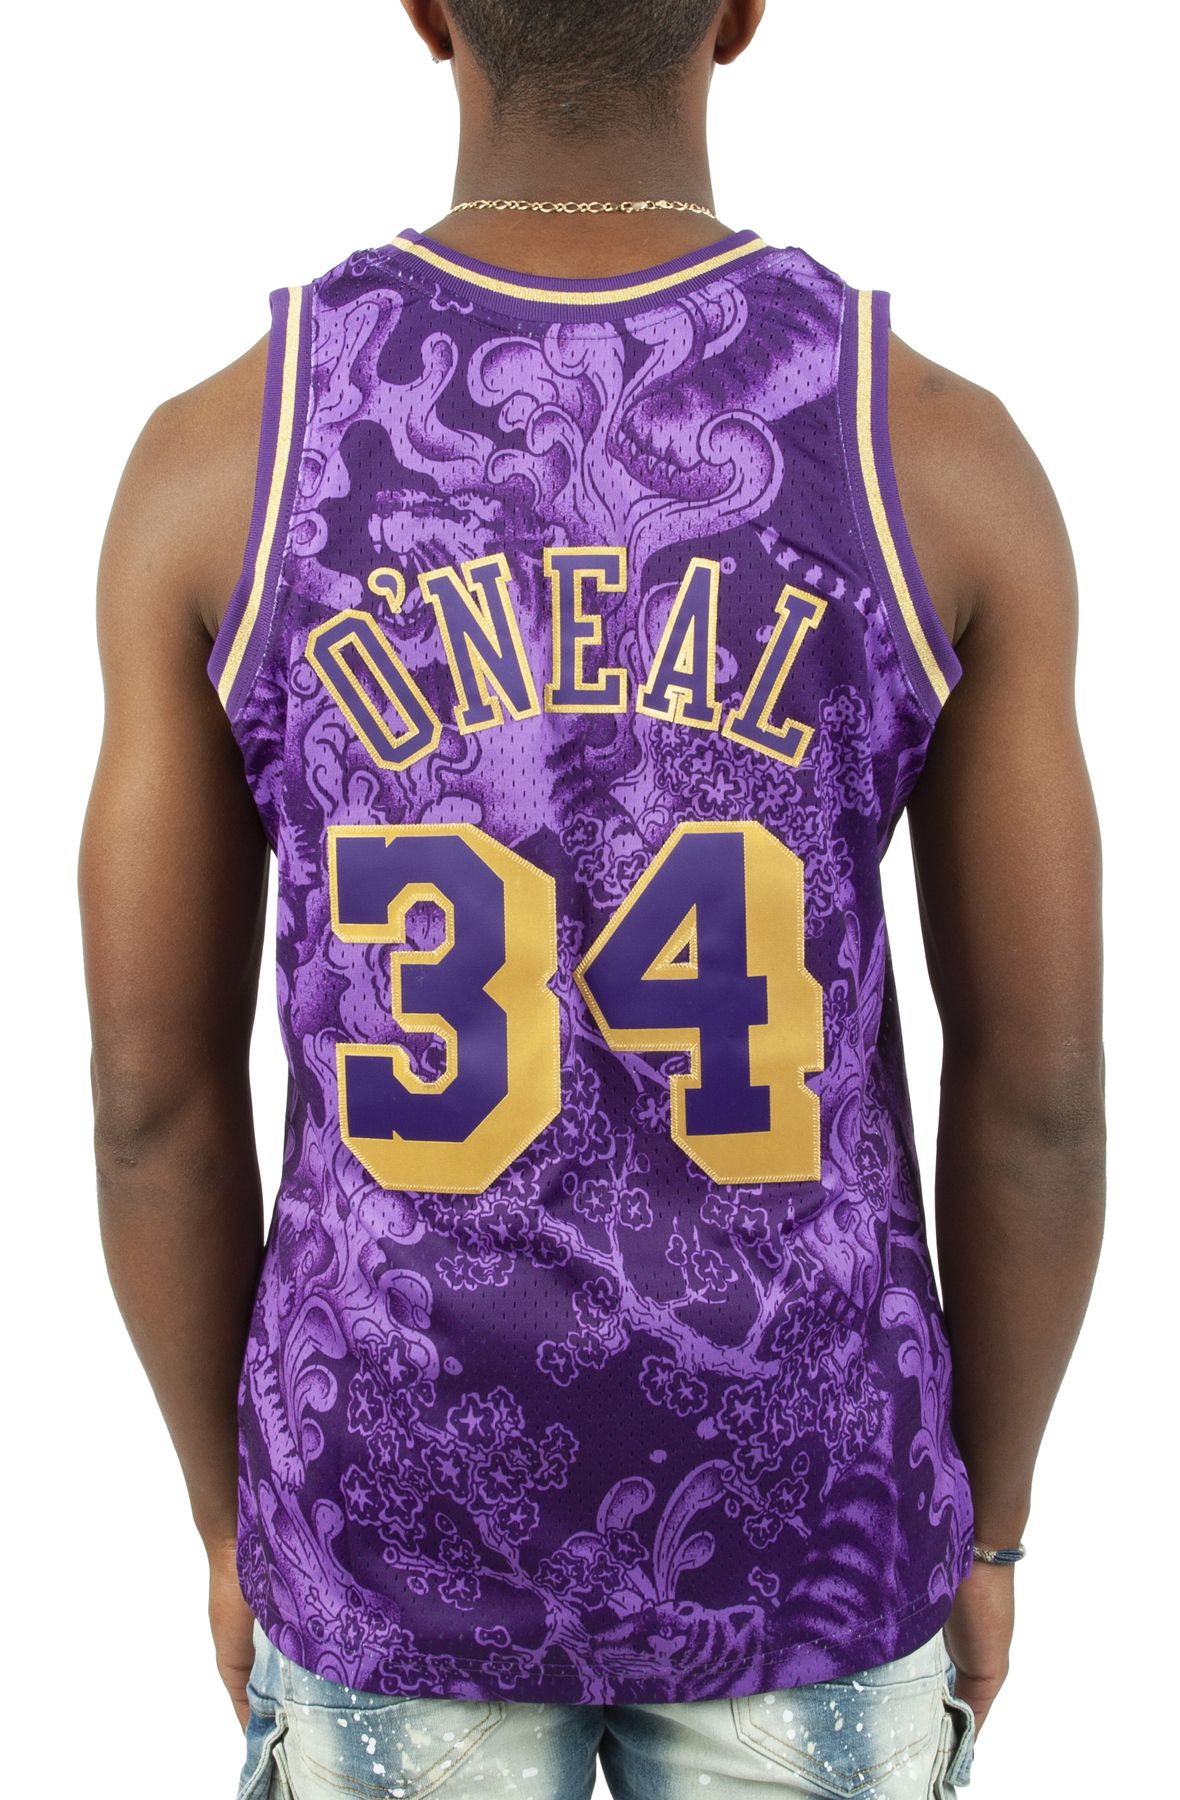 Neapolitan Swingman Shaquille O'Neal Los Angeles Lakers 1996-97 Jersey –  Players Closet